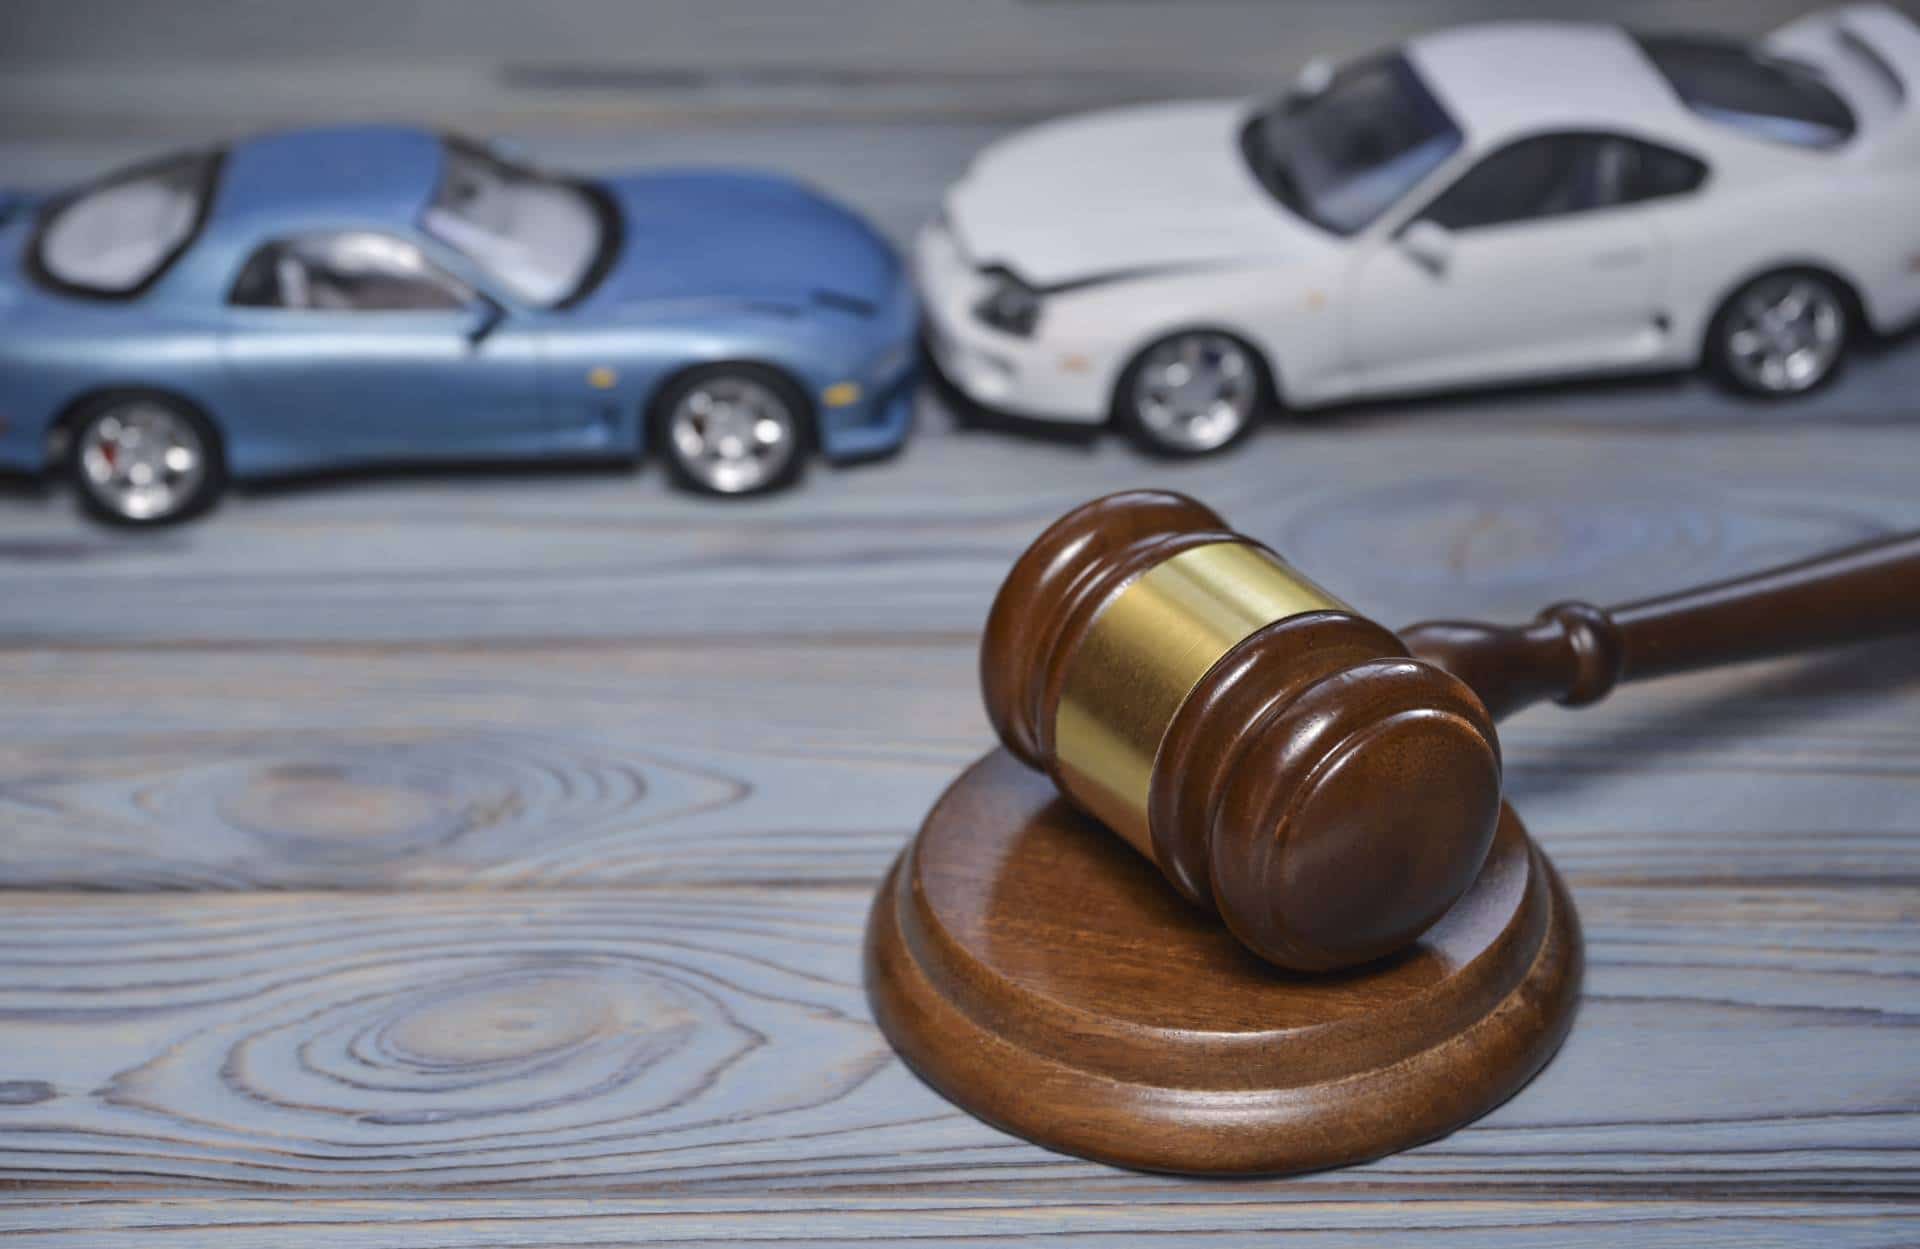 You need a qualified personal injury lawyer to fight for your compensation following an auto accident.